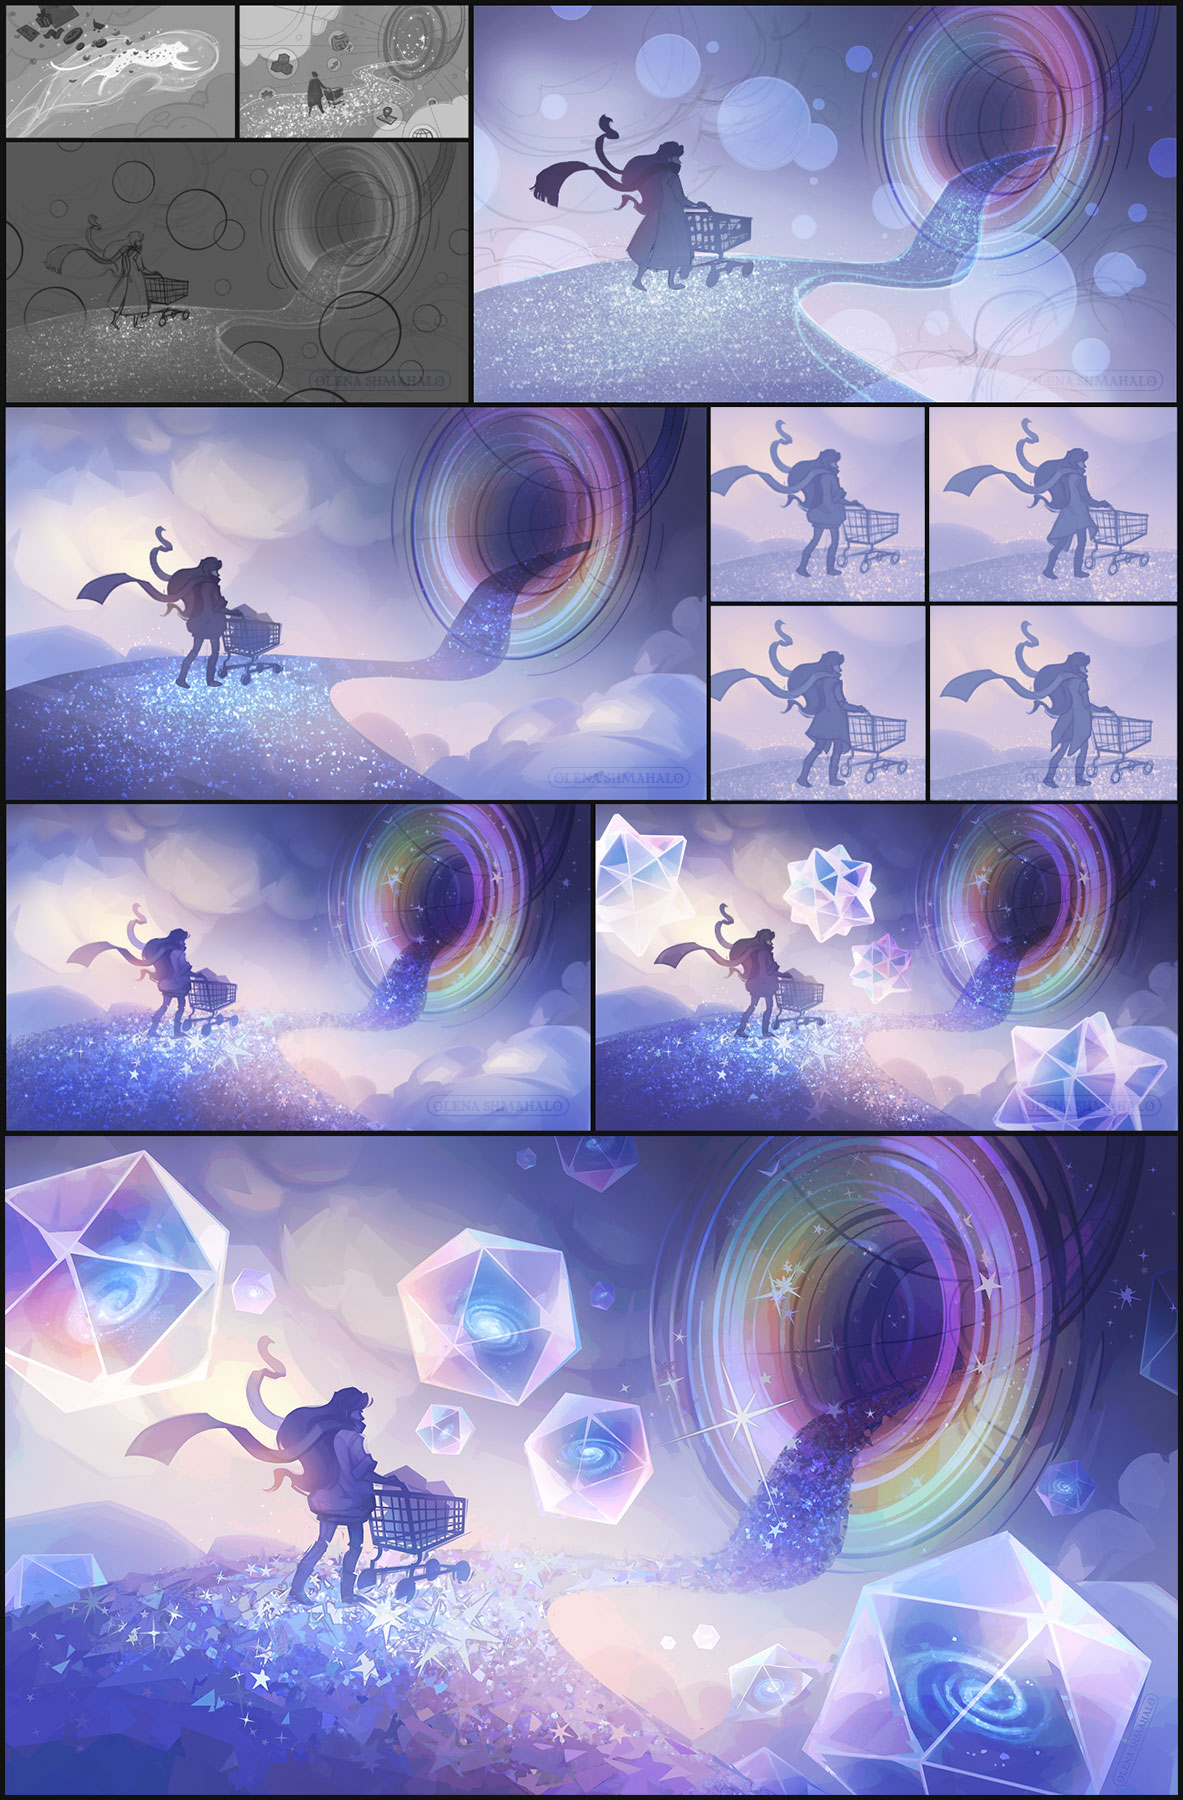 Sketches & process screenshots: stylized illustration in iridescent colors: a woman with a cart walking down a starry path toward a funnel-shaped portal, surrounded by floating icosahedron bubbles containing galaxies.